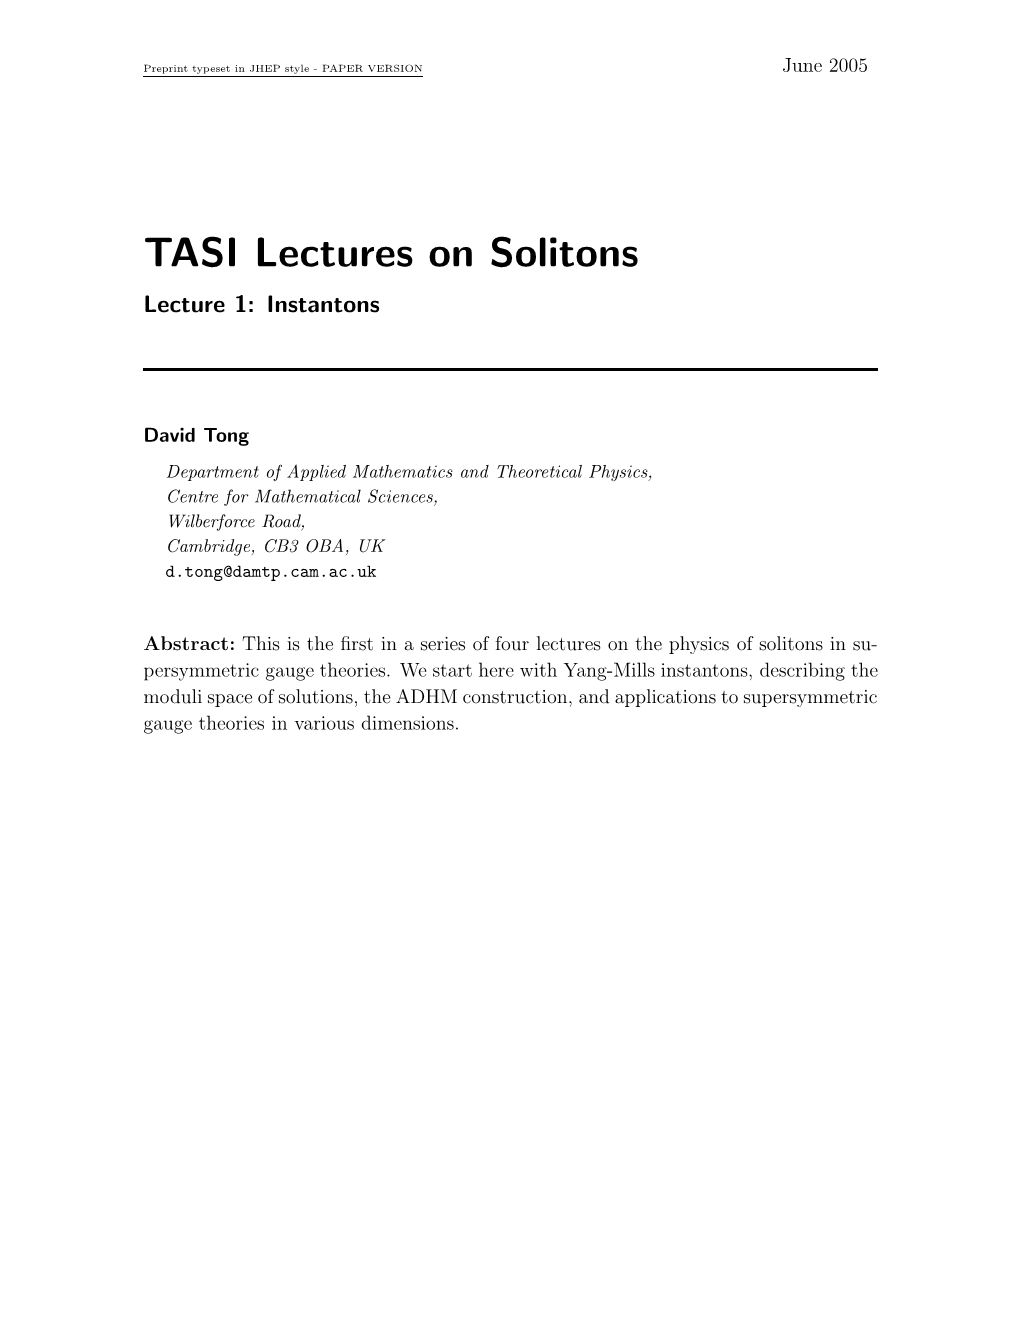 TASI Lectures on Solitons Lecture 1: Instantons